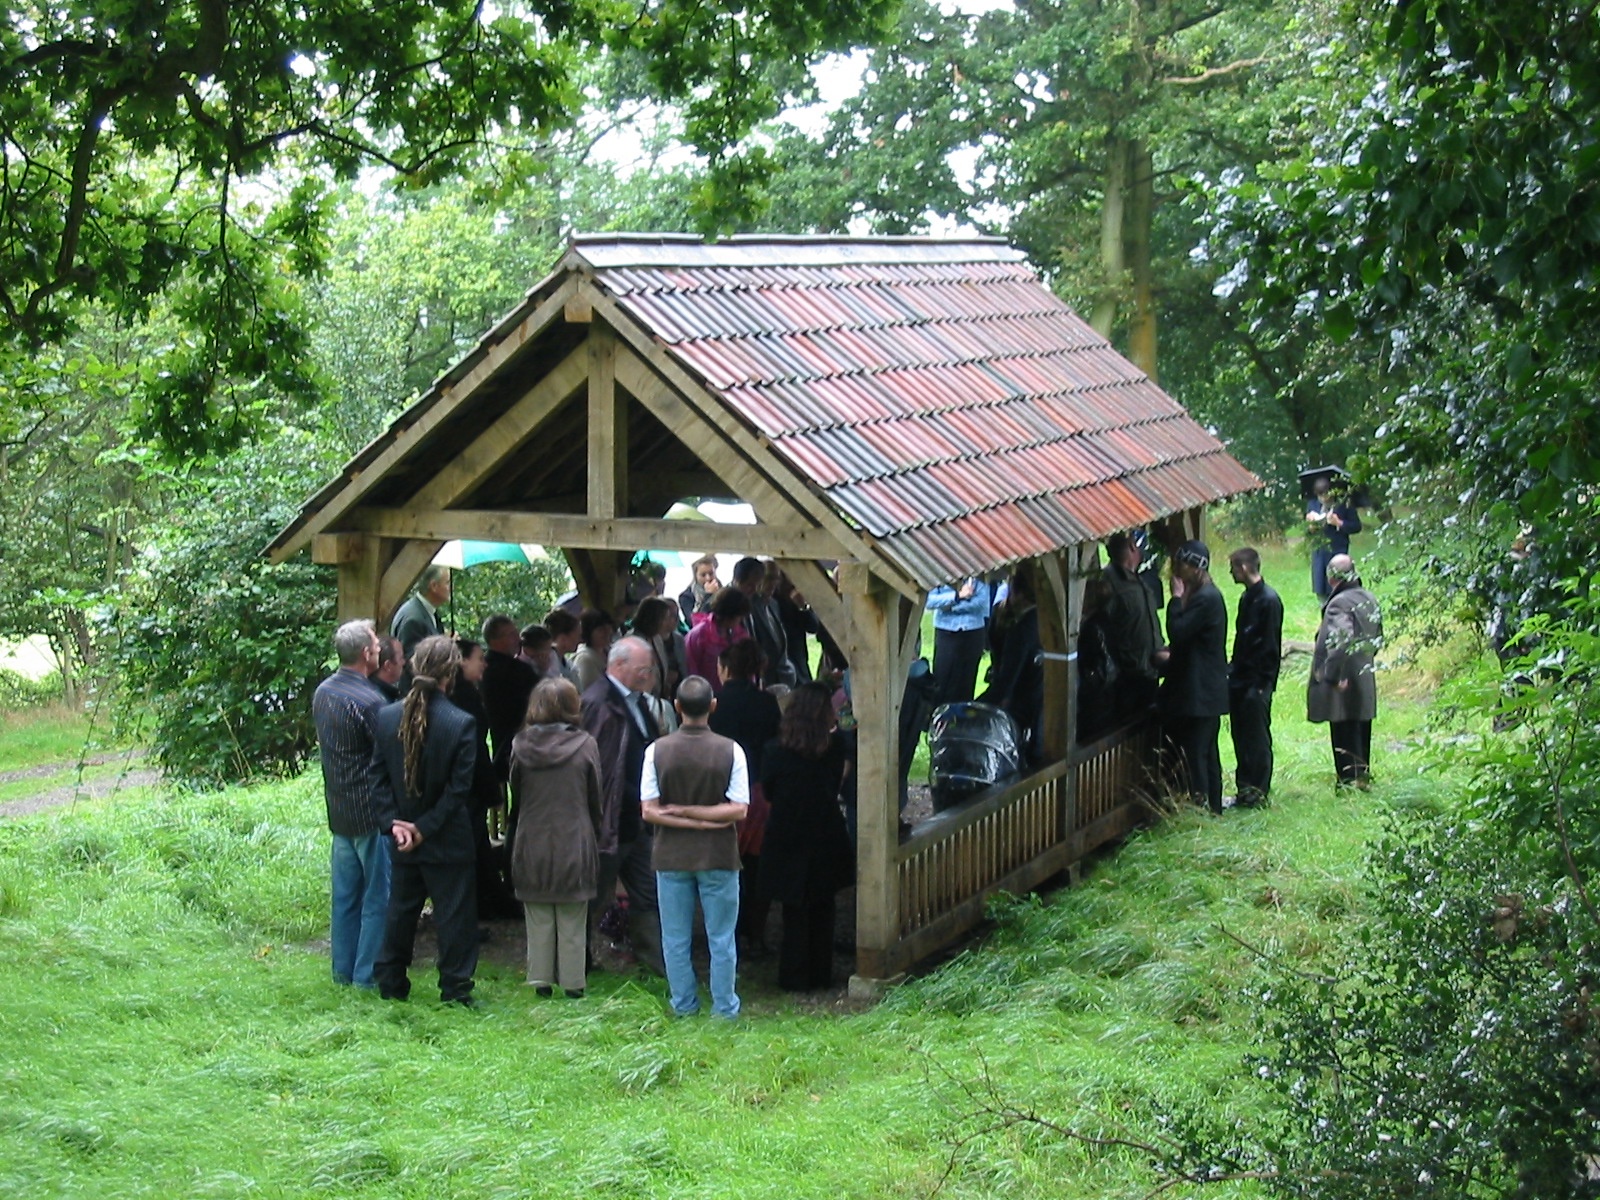 A celebrant led funeral at Usk Castle Chase, with a group of people standing within the memorial shelter.